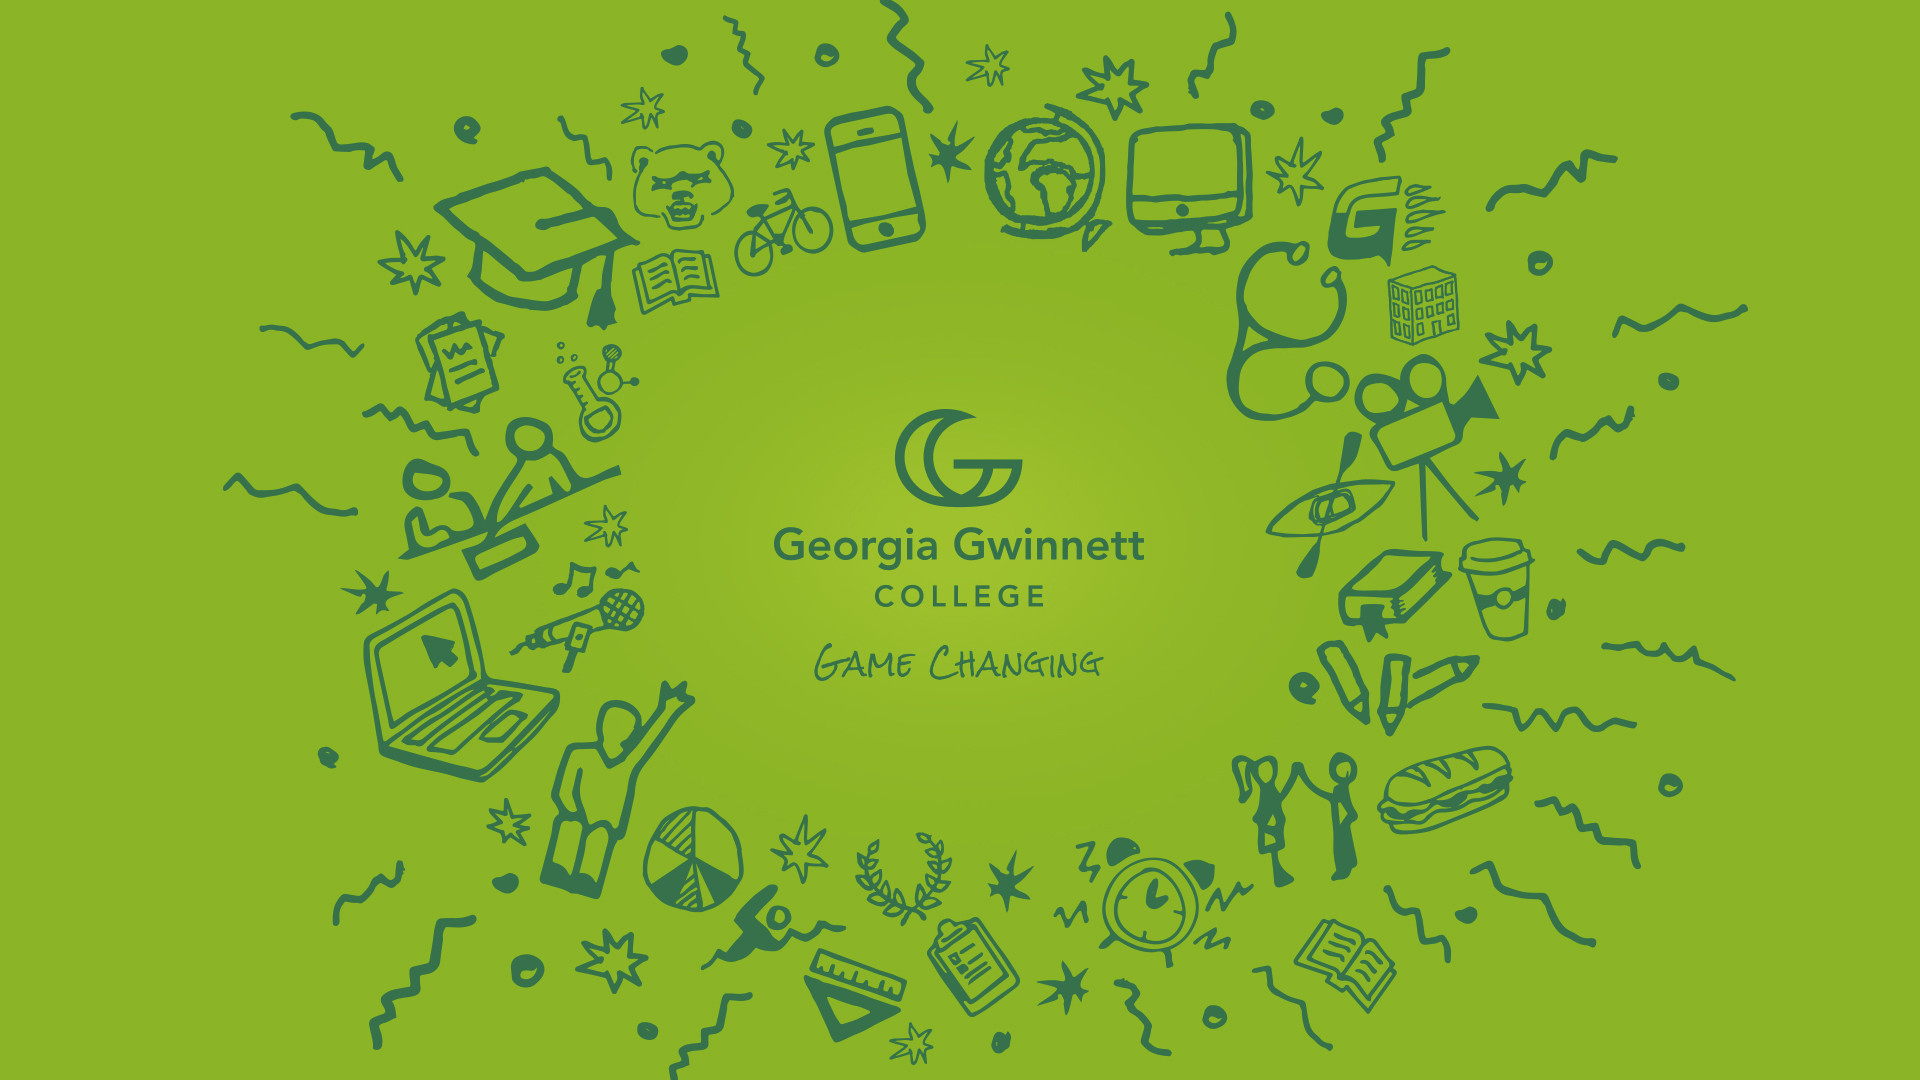 1920x1080 GGC Electronic Wallpaper image. Georgia Gwinnett College Game Changing on  light green background surrounded by circle of doodles